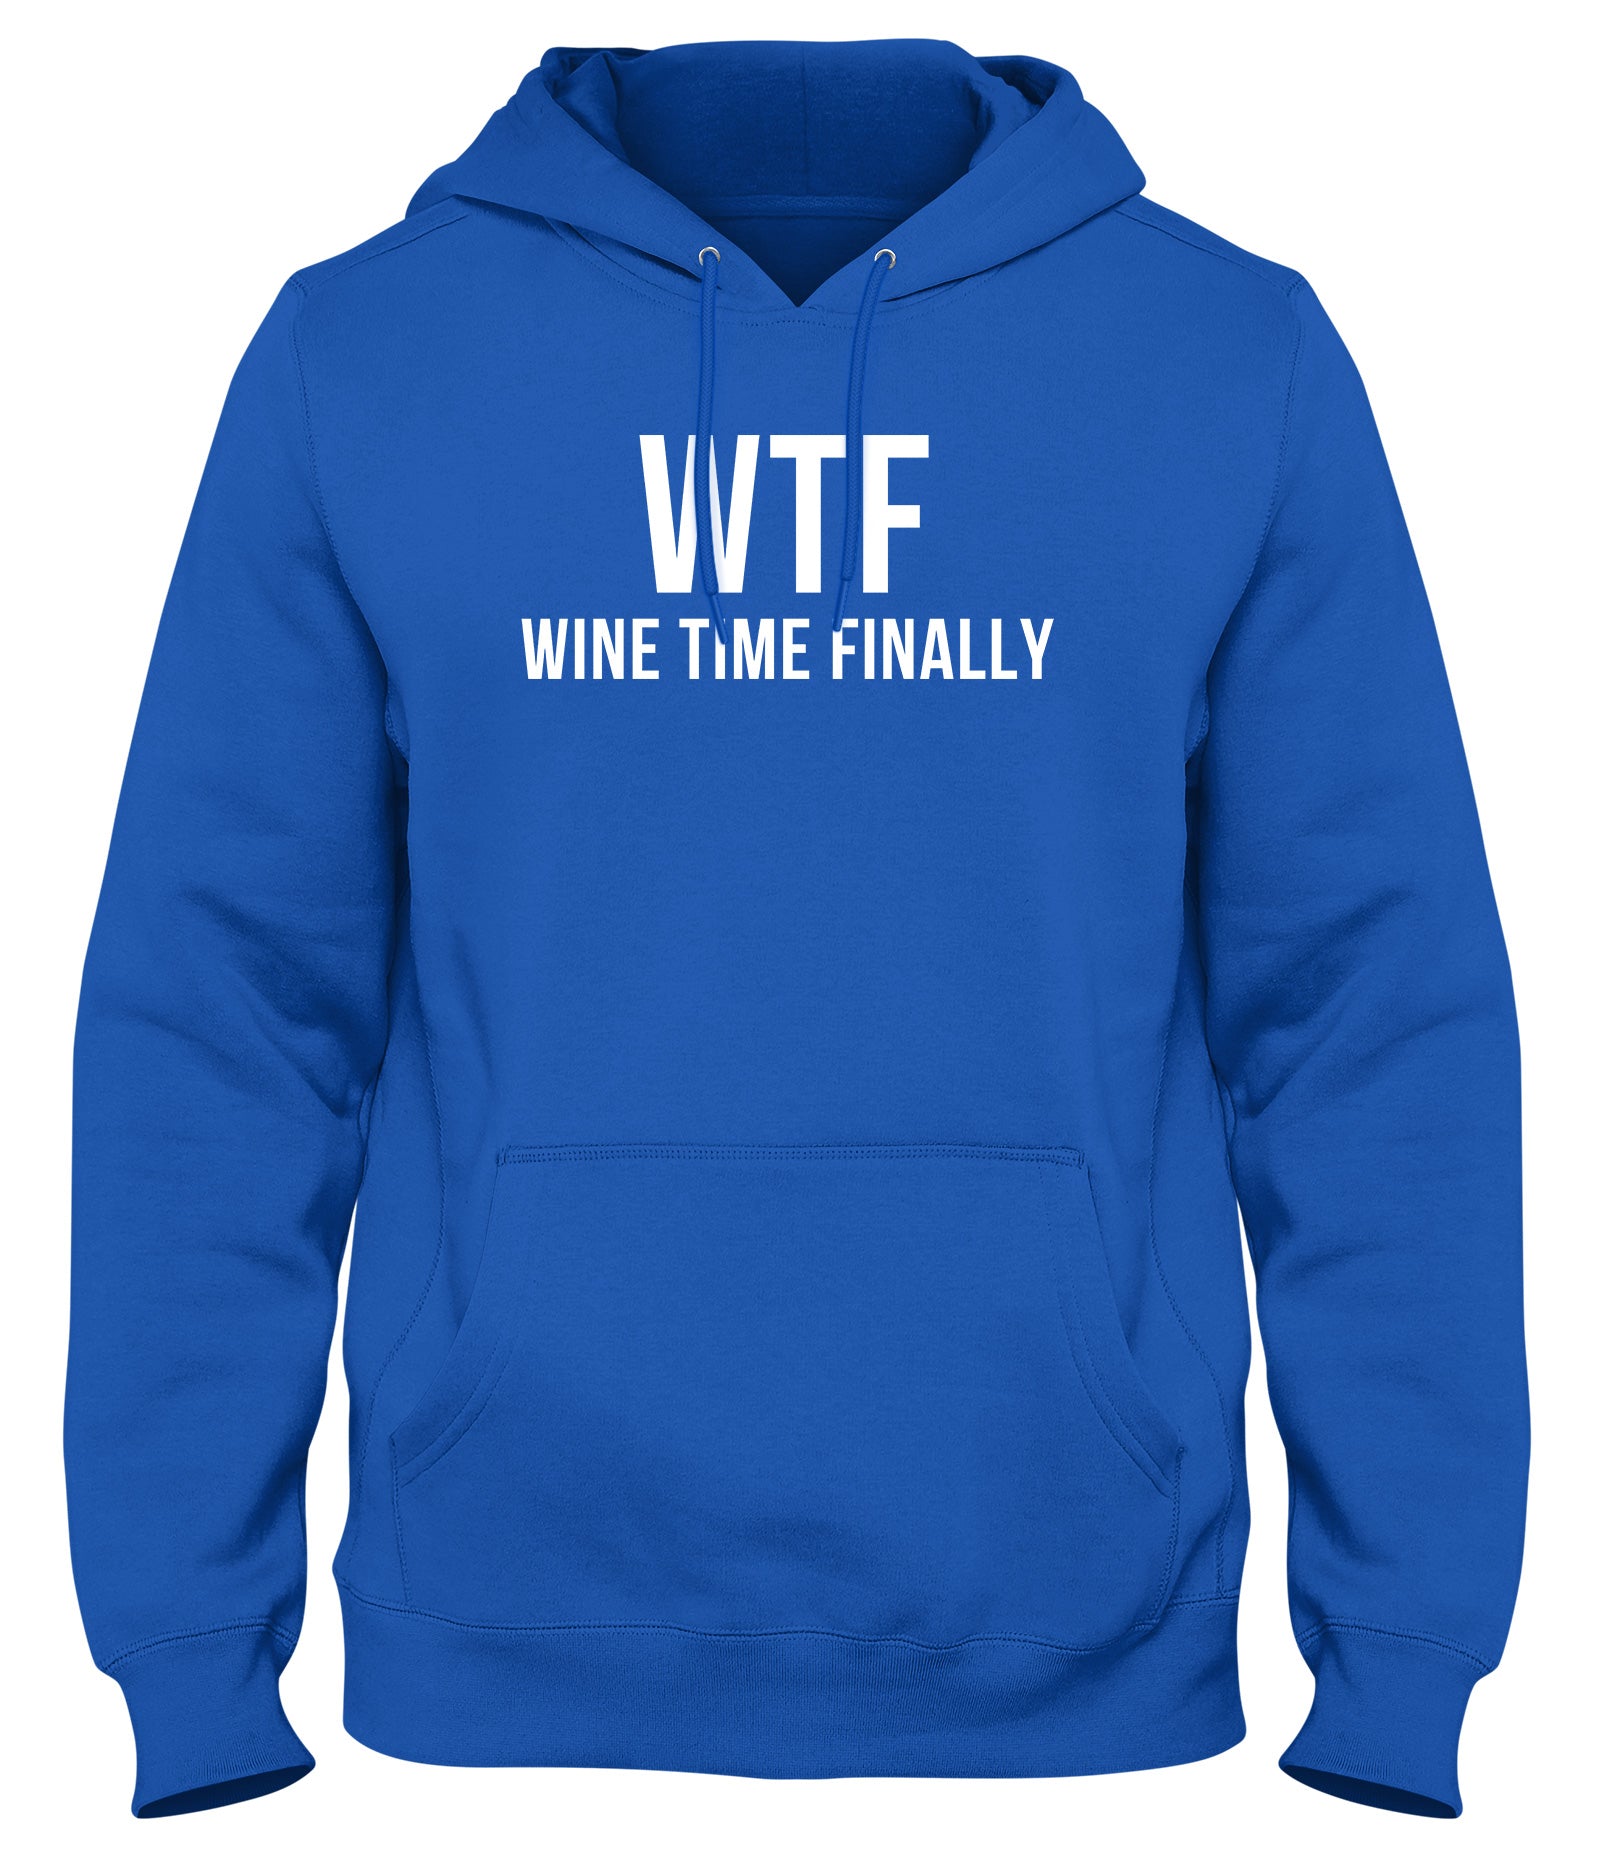 WTF WINE TIME FINALLY MENS WOMENS UNISEX FUNNY HOODIE